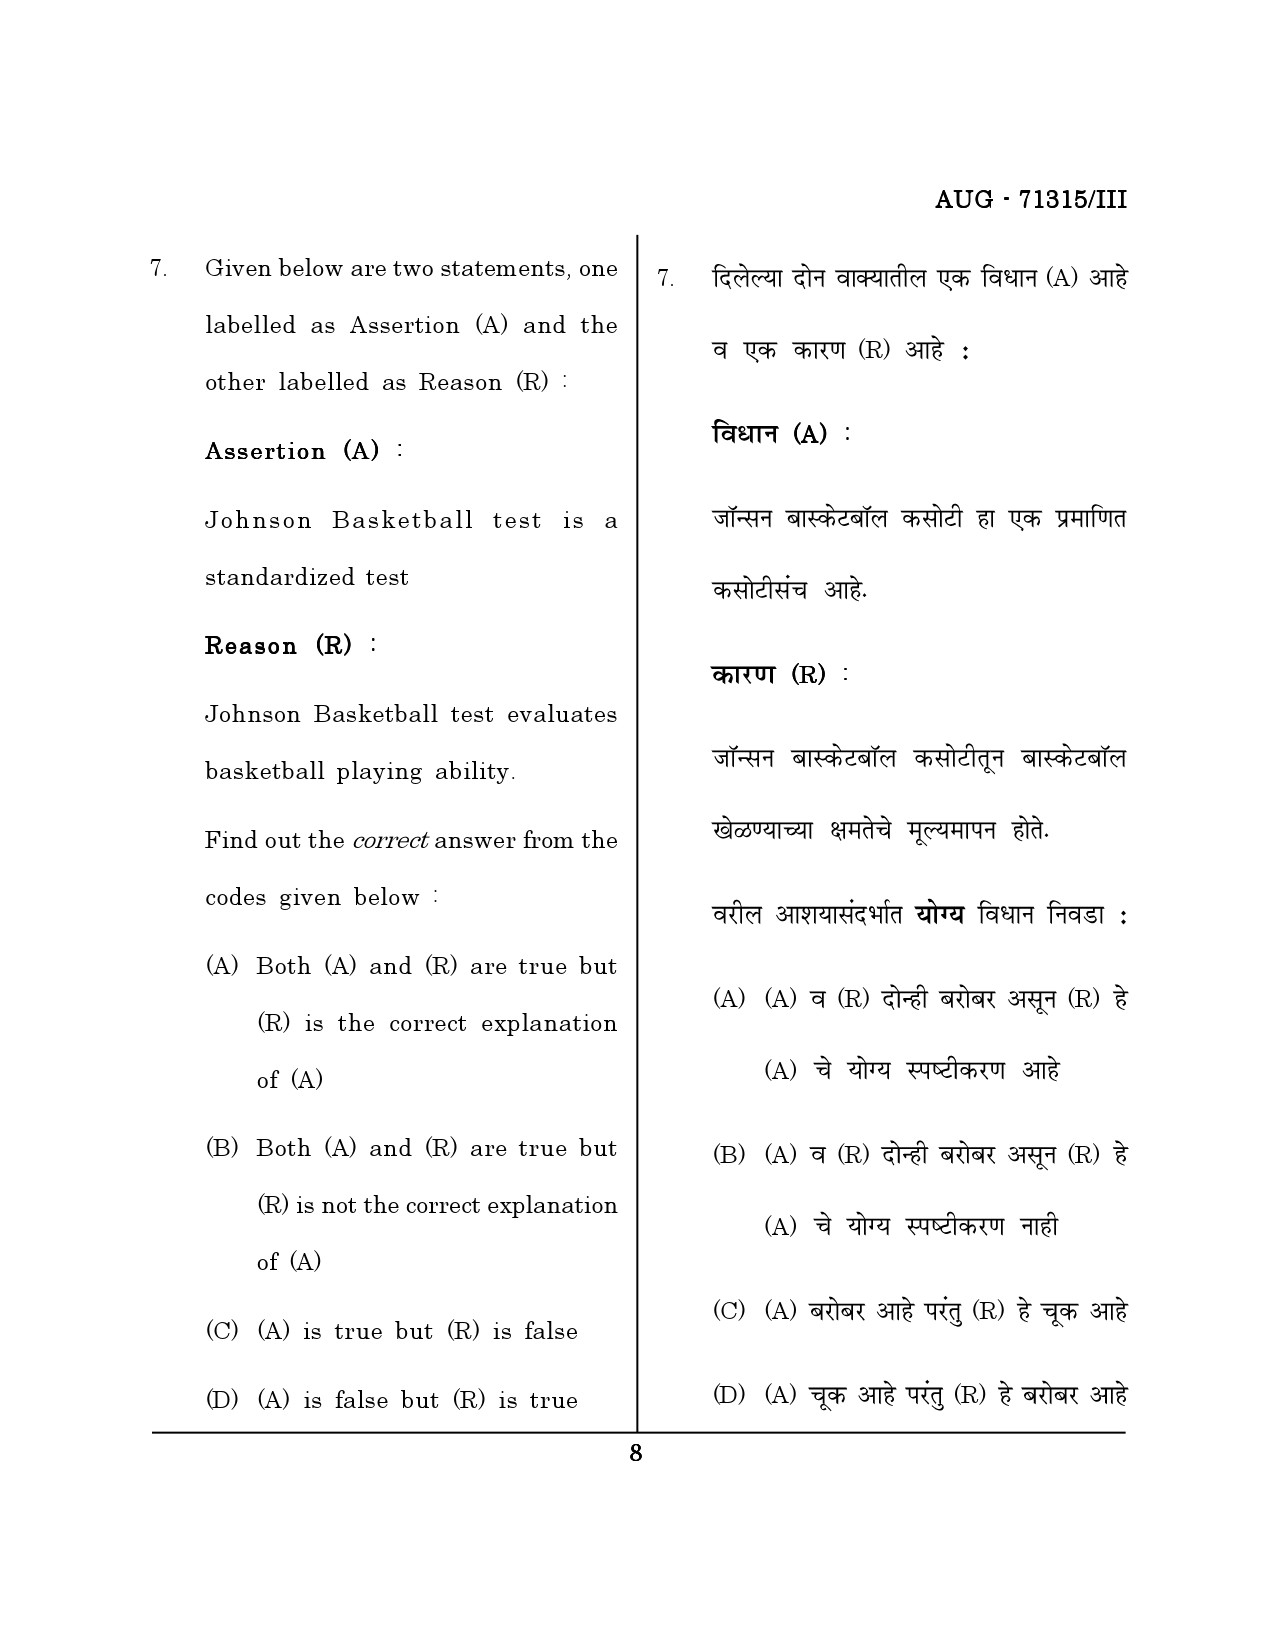 Maharashtra SET Physical Education Question Paper III August 2015 7